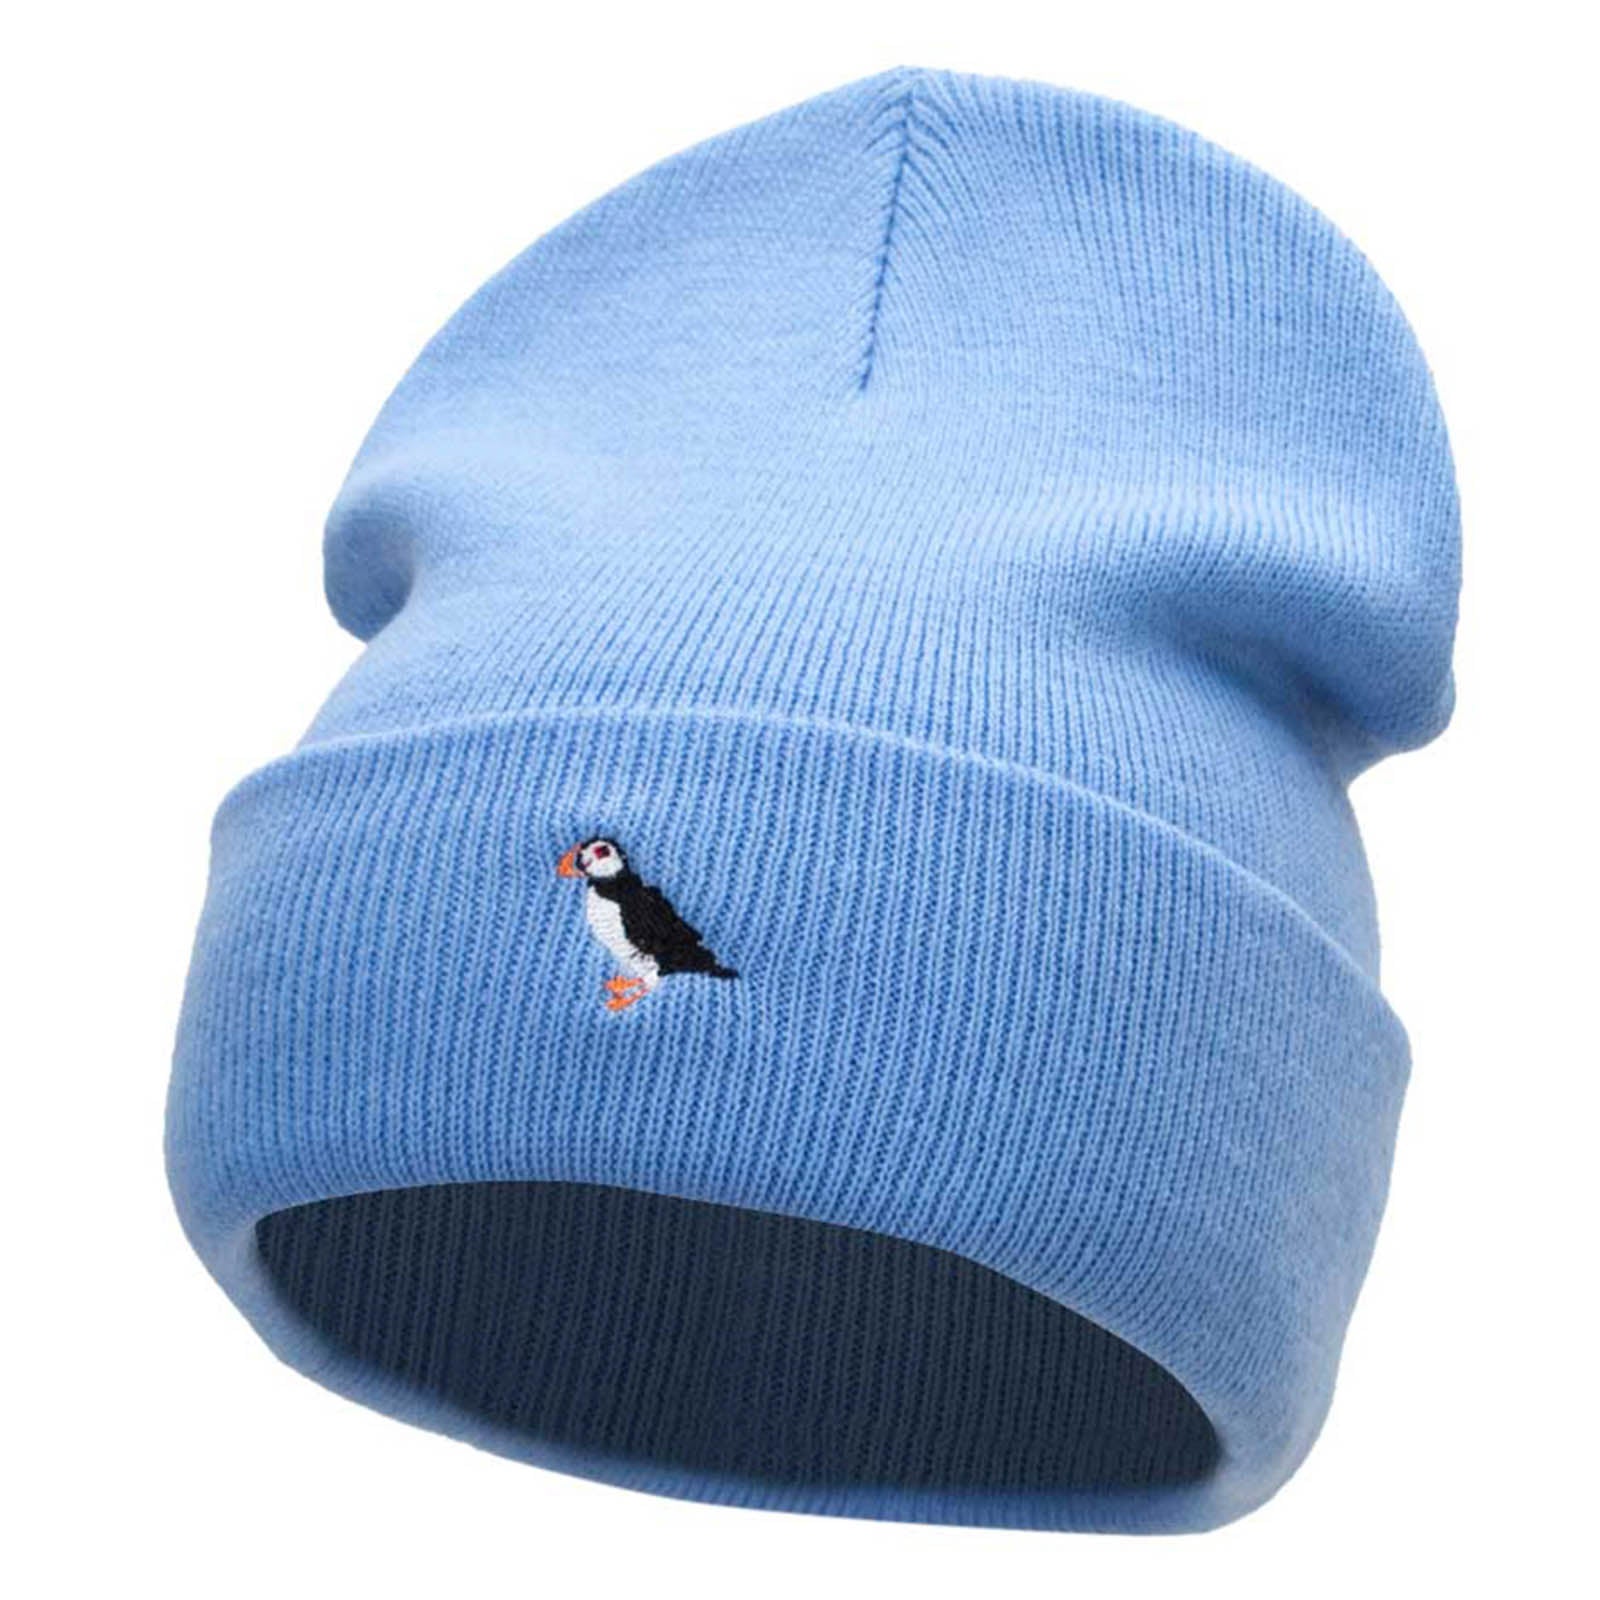 Mini Puffin Embroidered 12 Inch Long Knitted Beanie - Sky Blue OSFM